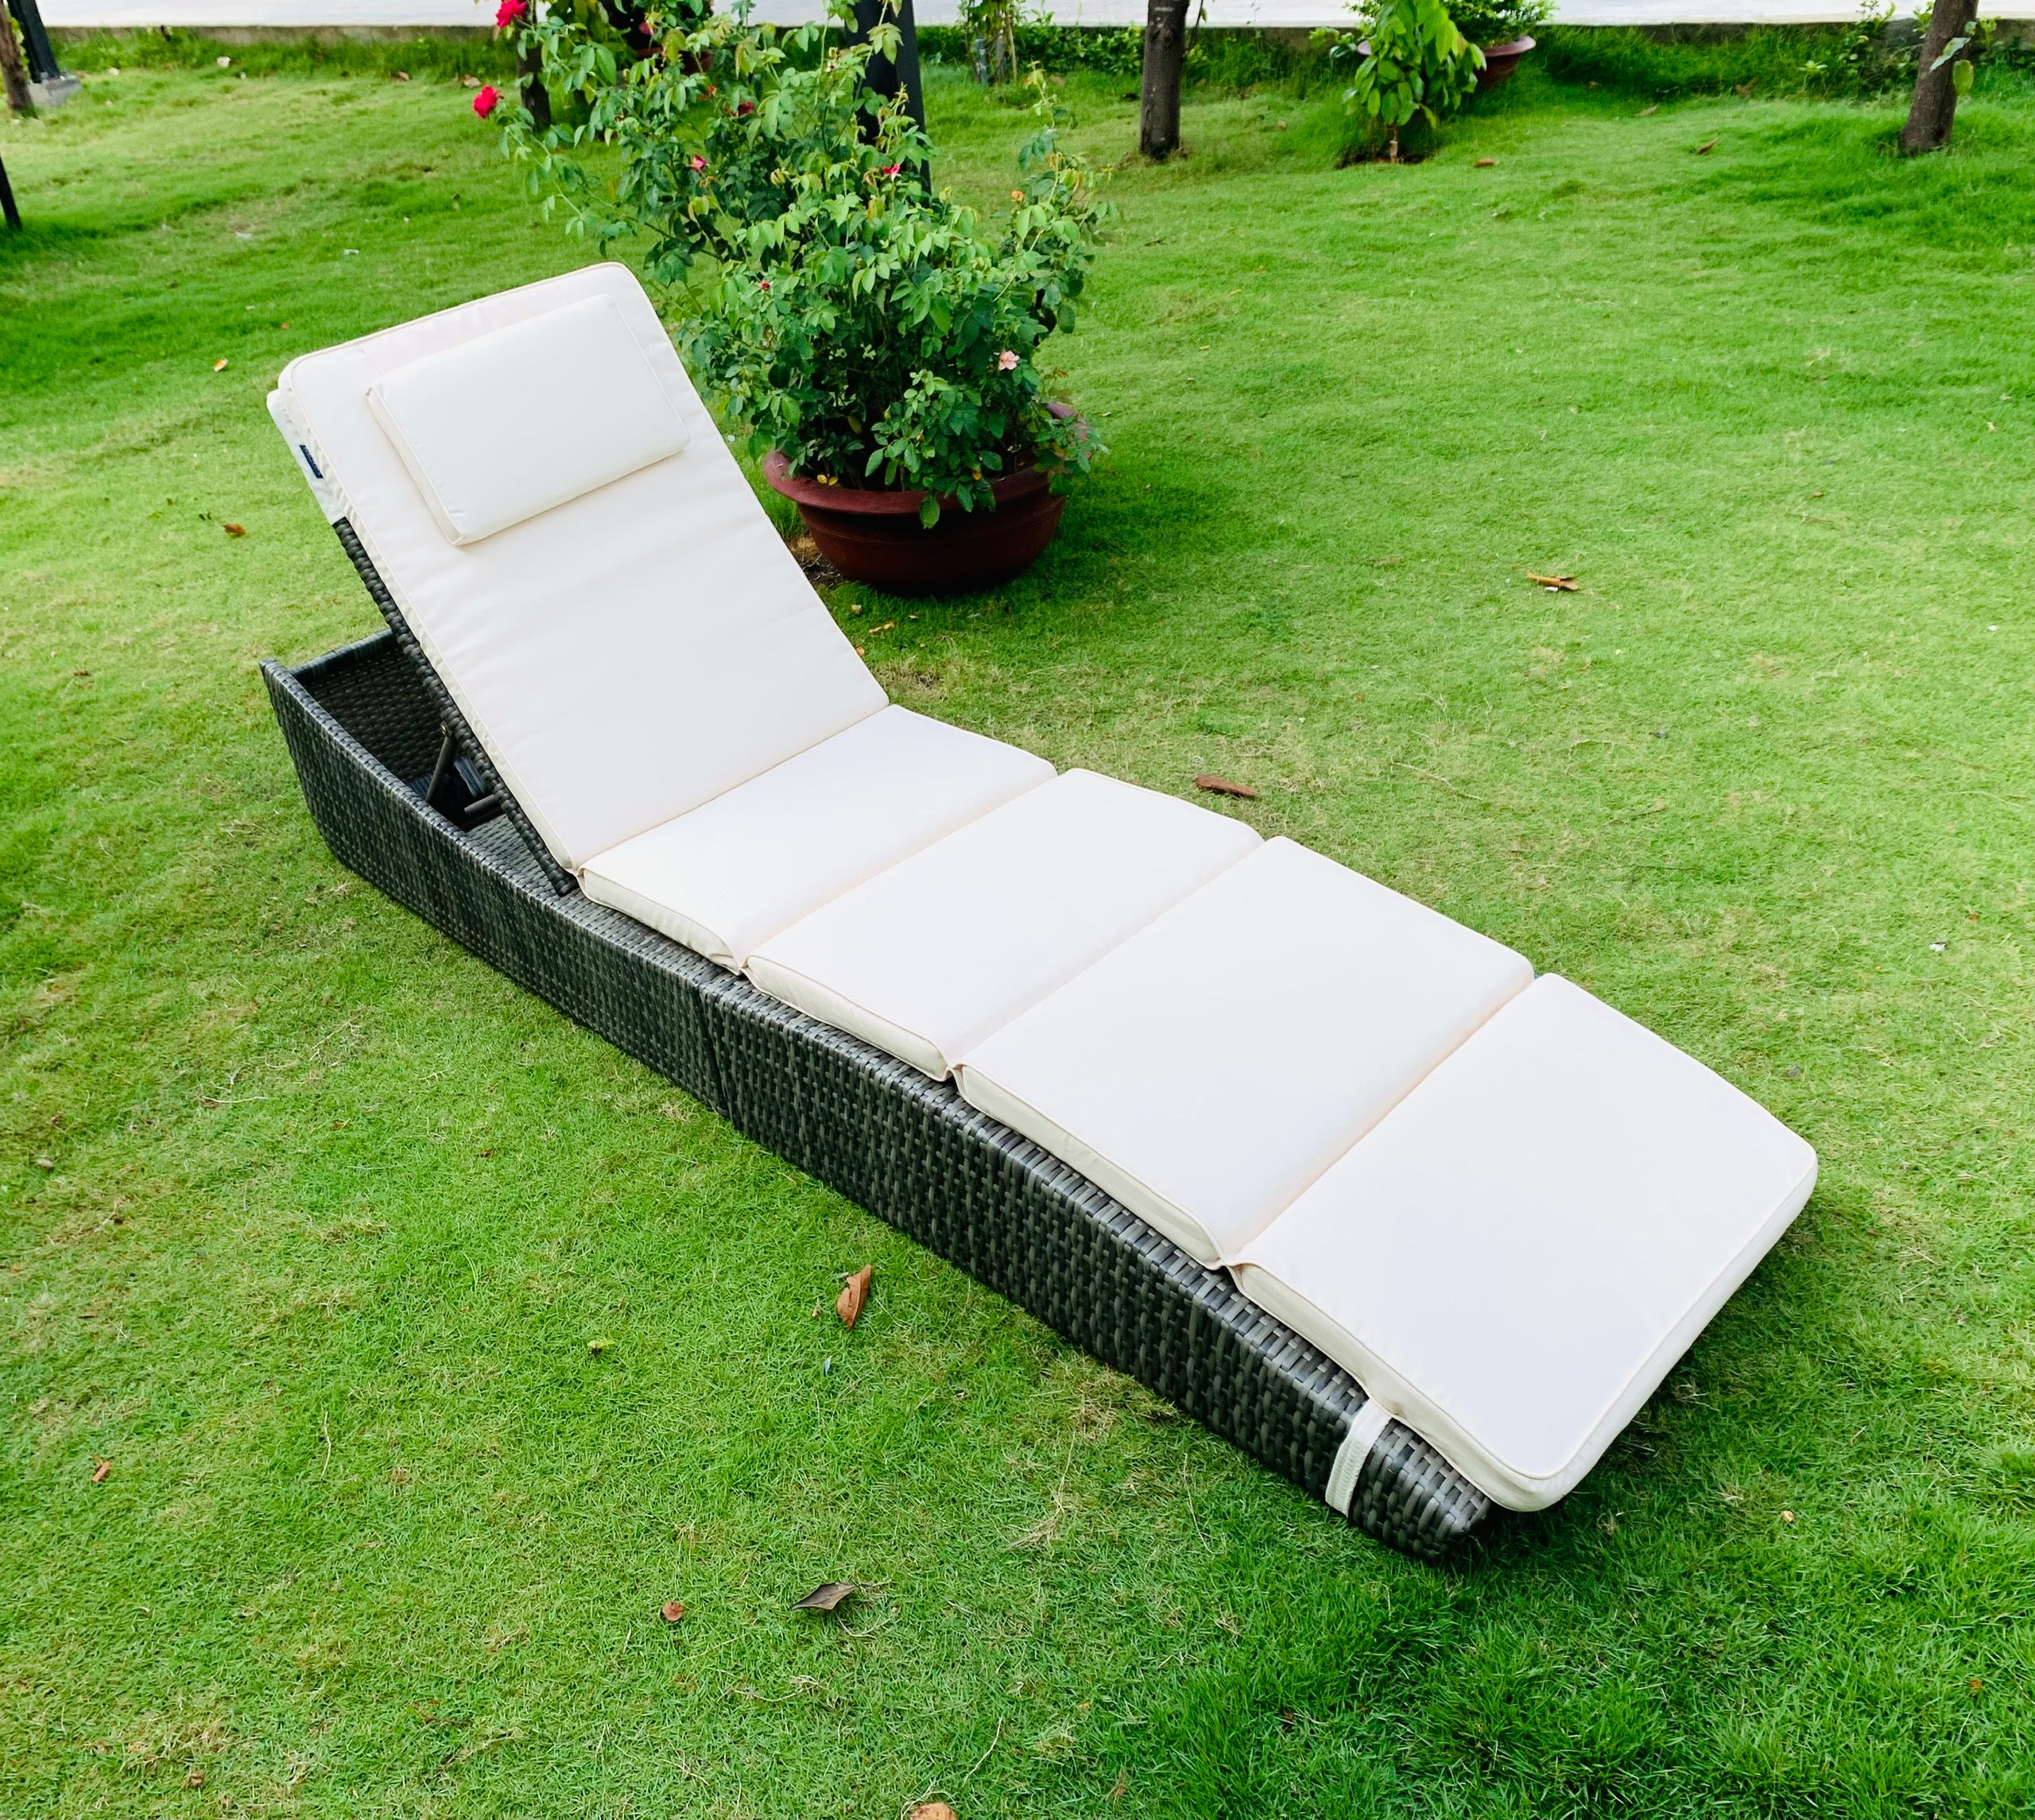 Outdoor Foldable Chaise Pool Lounge Chair Folding Wicker Rattan Sun Bed Patio Couch Reclining Lounger Adjustable Padded Backrest Pillow Assembled - image 3 of 5